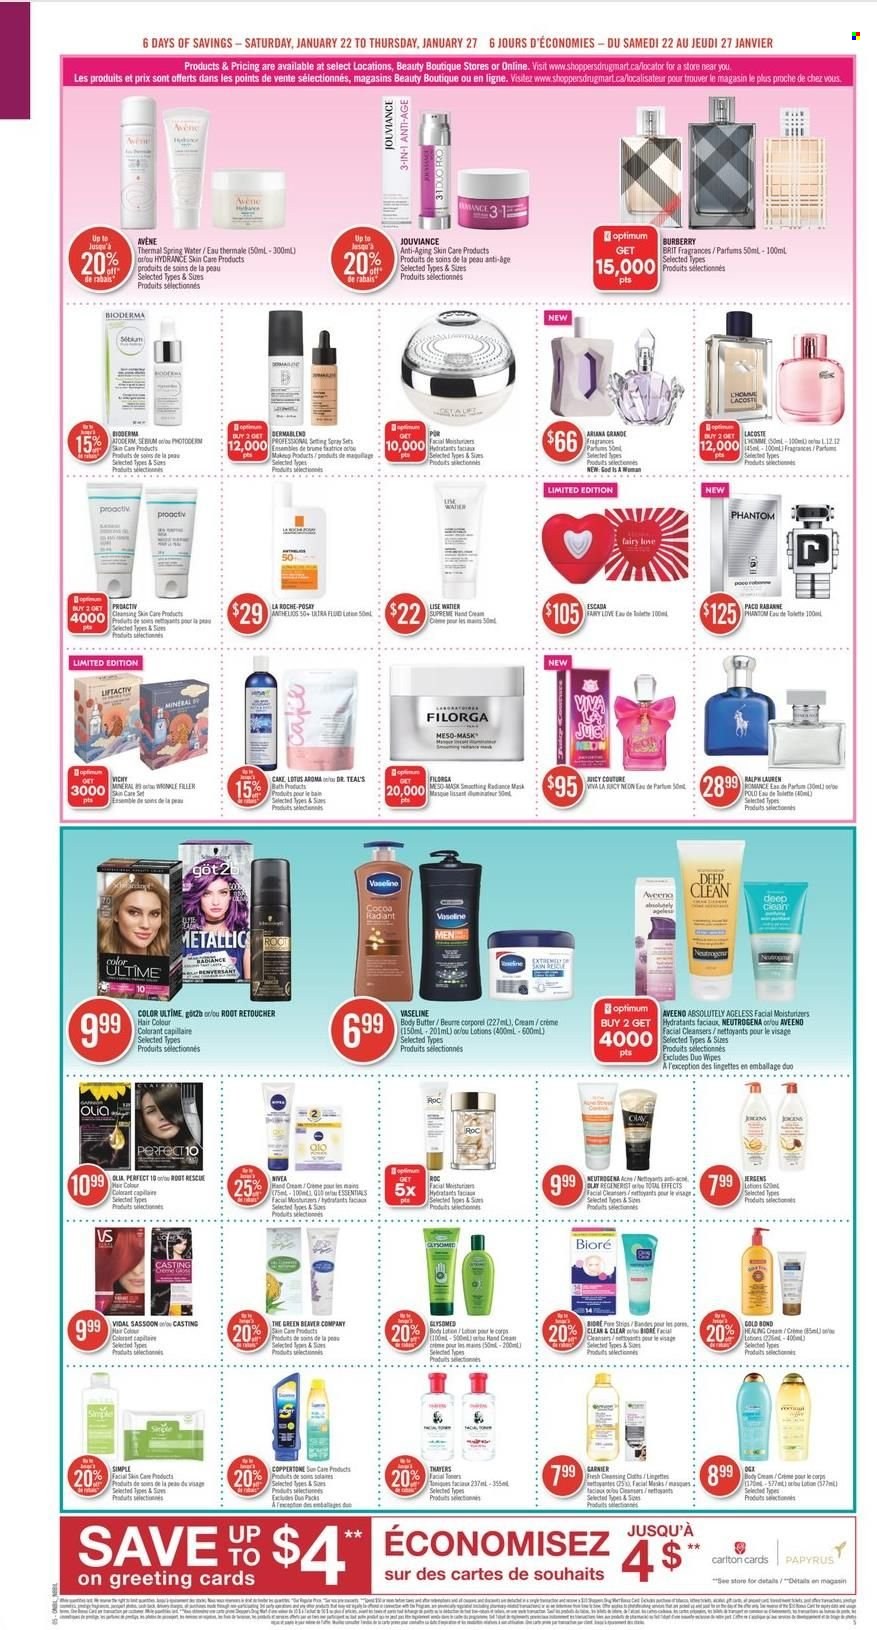 thumbnail - Shoppers Drug Mart Flyer - January 22, 2022 - January 27, 2022 - Sales products - cake, cocoa, spring water, wipes, Aveeno, Fairy, Vaseline, La Roche-Posay, moisturizer, Bioré®, Clean & Clear, Paco Rabanne, hair color, body butter, Jergens, Ralph Lauren, Lotus, Lacoste, Burberry, Escada, Neutrogena, Nivea. Page 8.